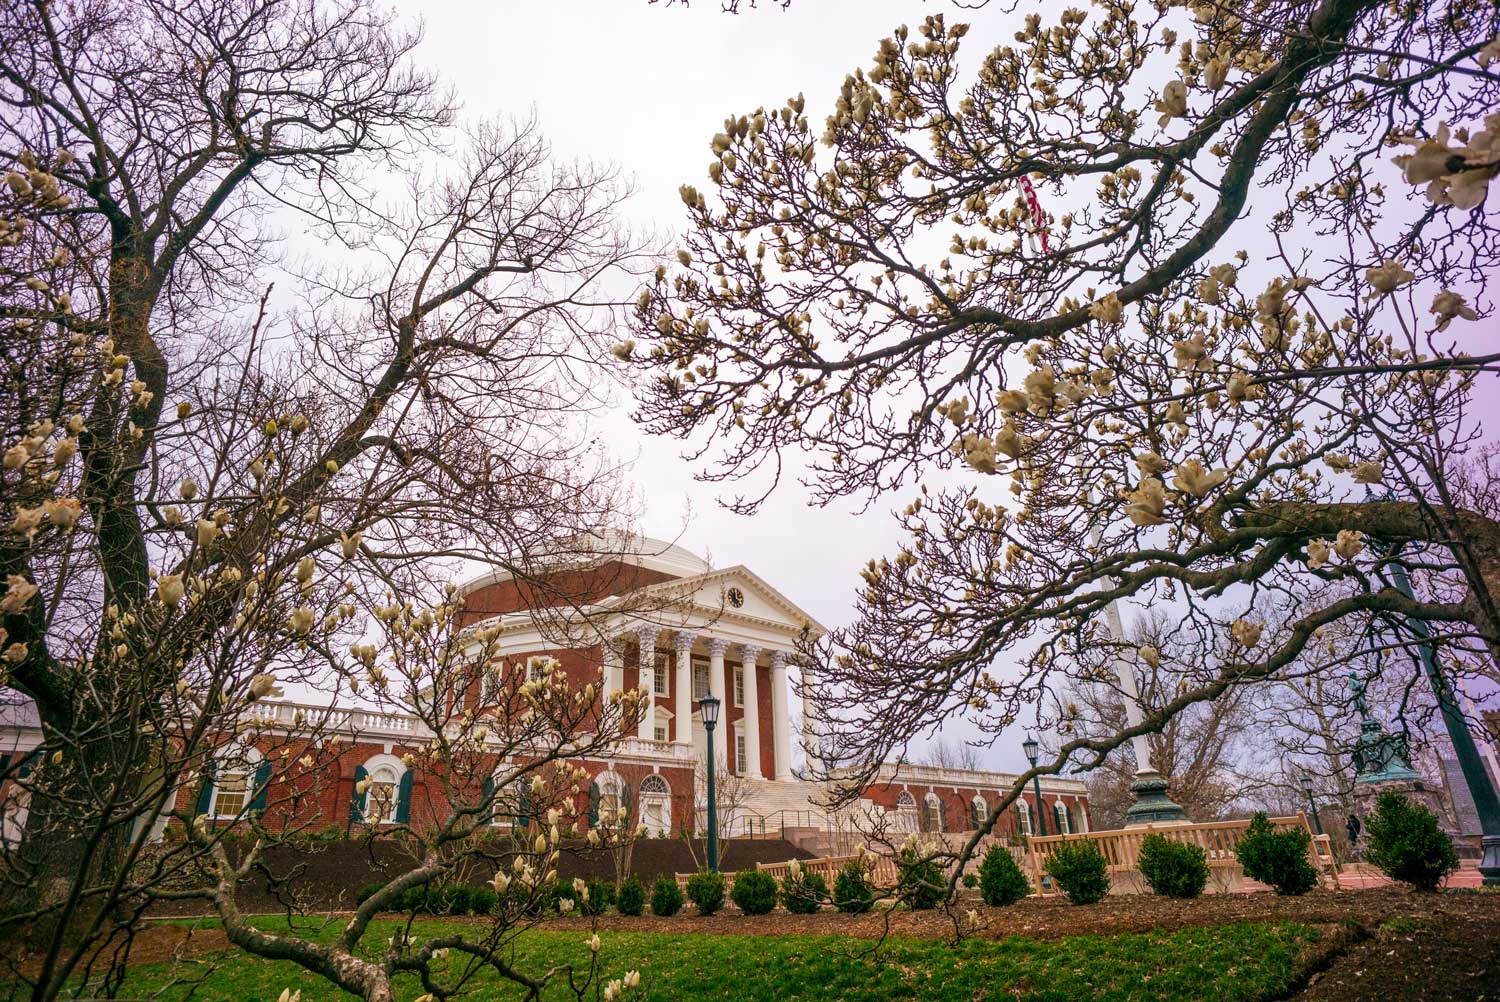 2,409 Applicants Receive UVA Offers During Regular Admission UVA Today